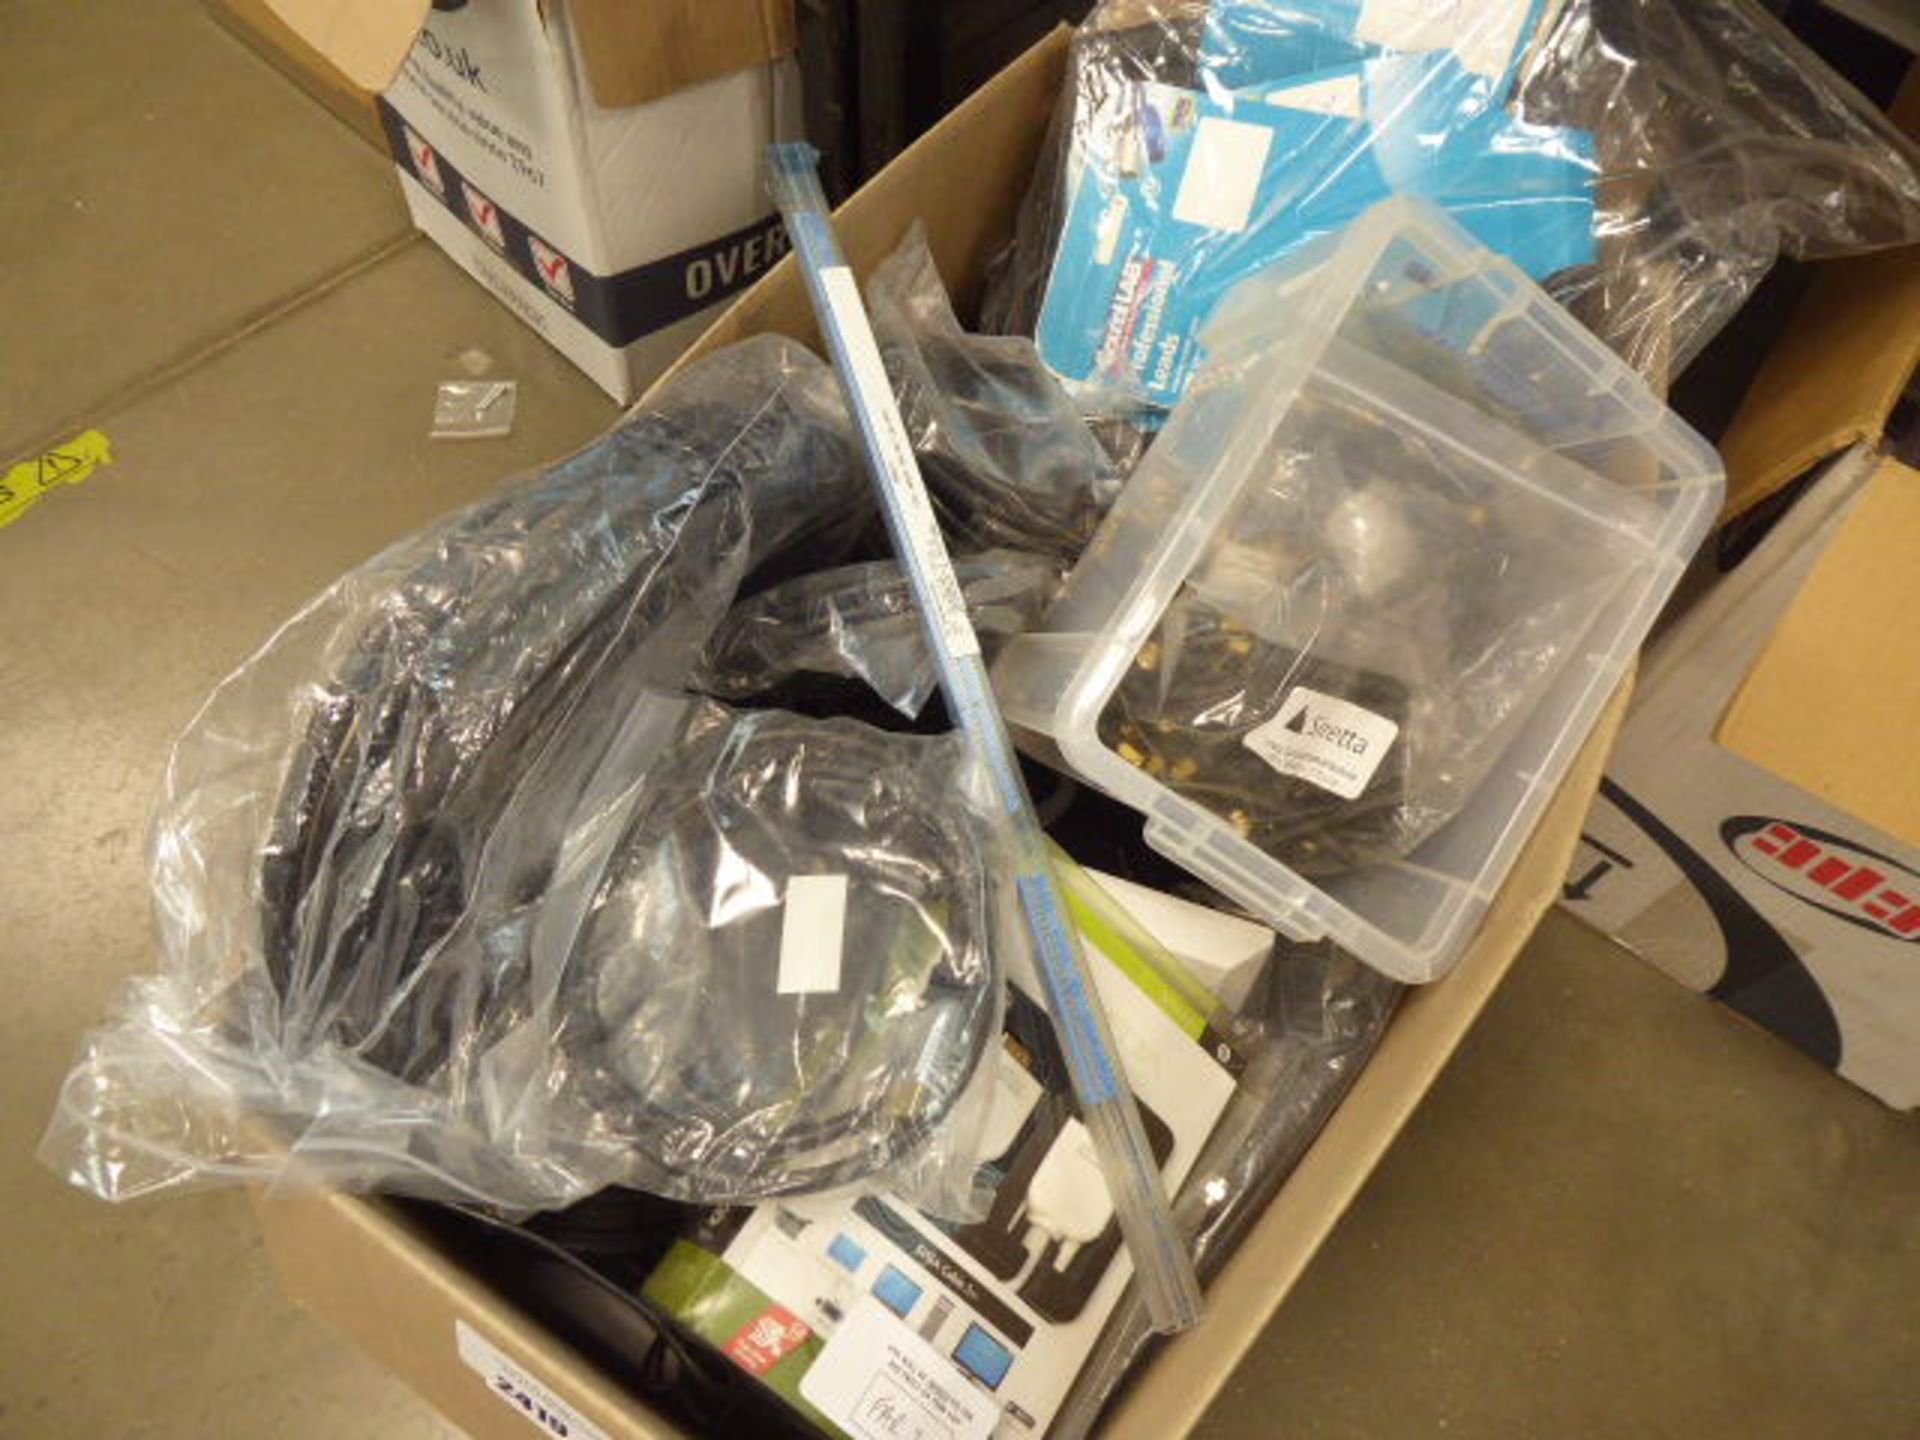 Box containing various AV cables to include HDMI cables, VGA cables, extensions, etc